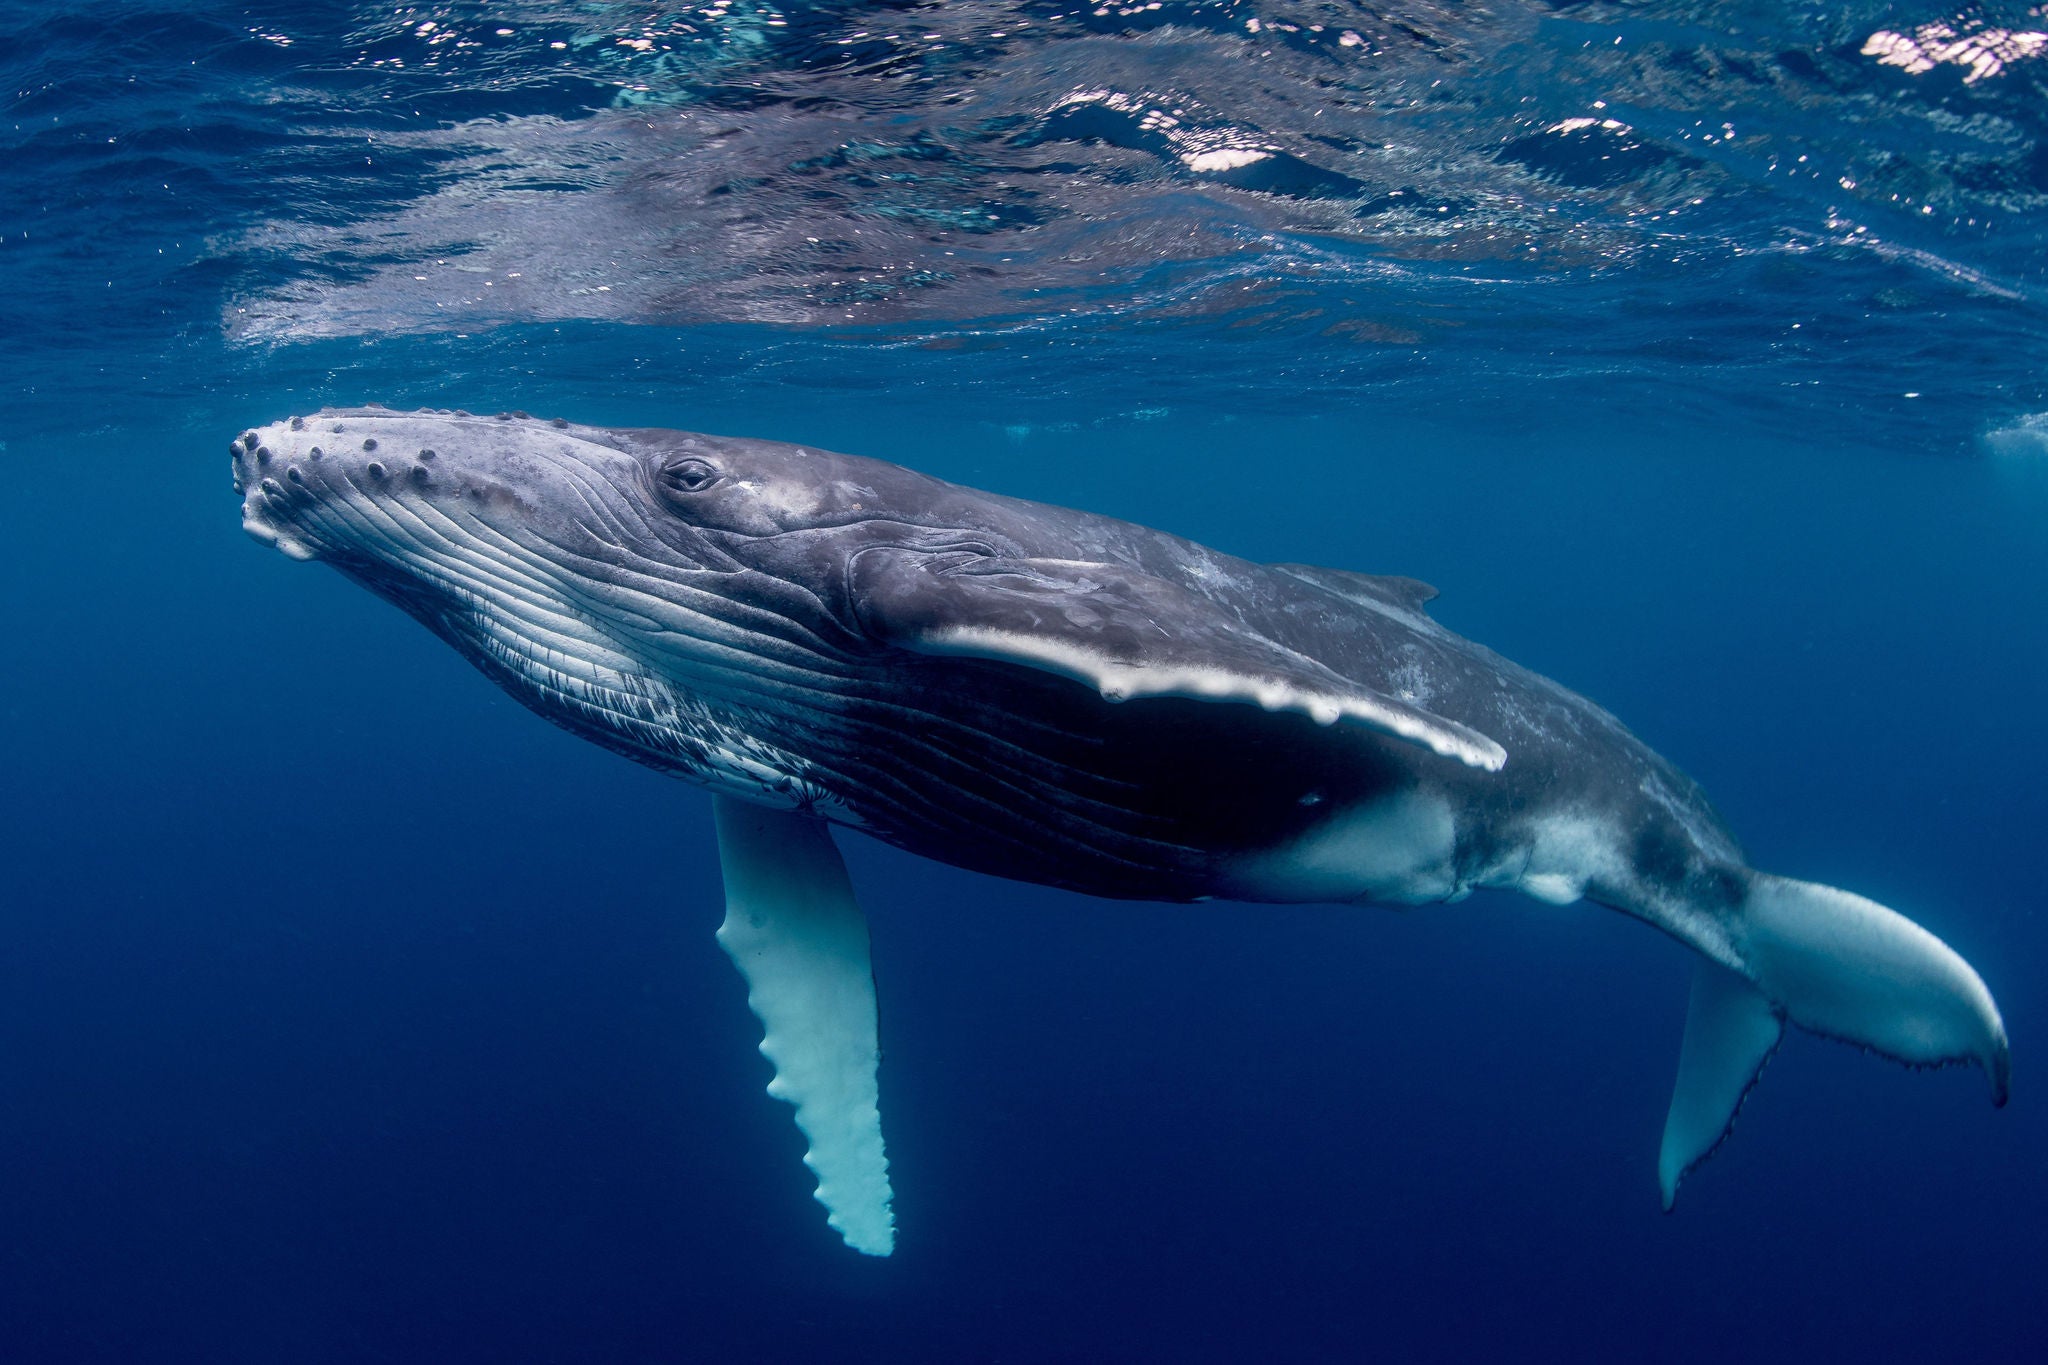 Humpback whale swims in the ocean